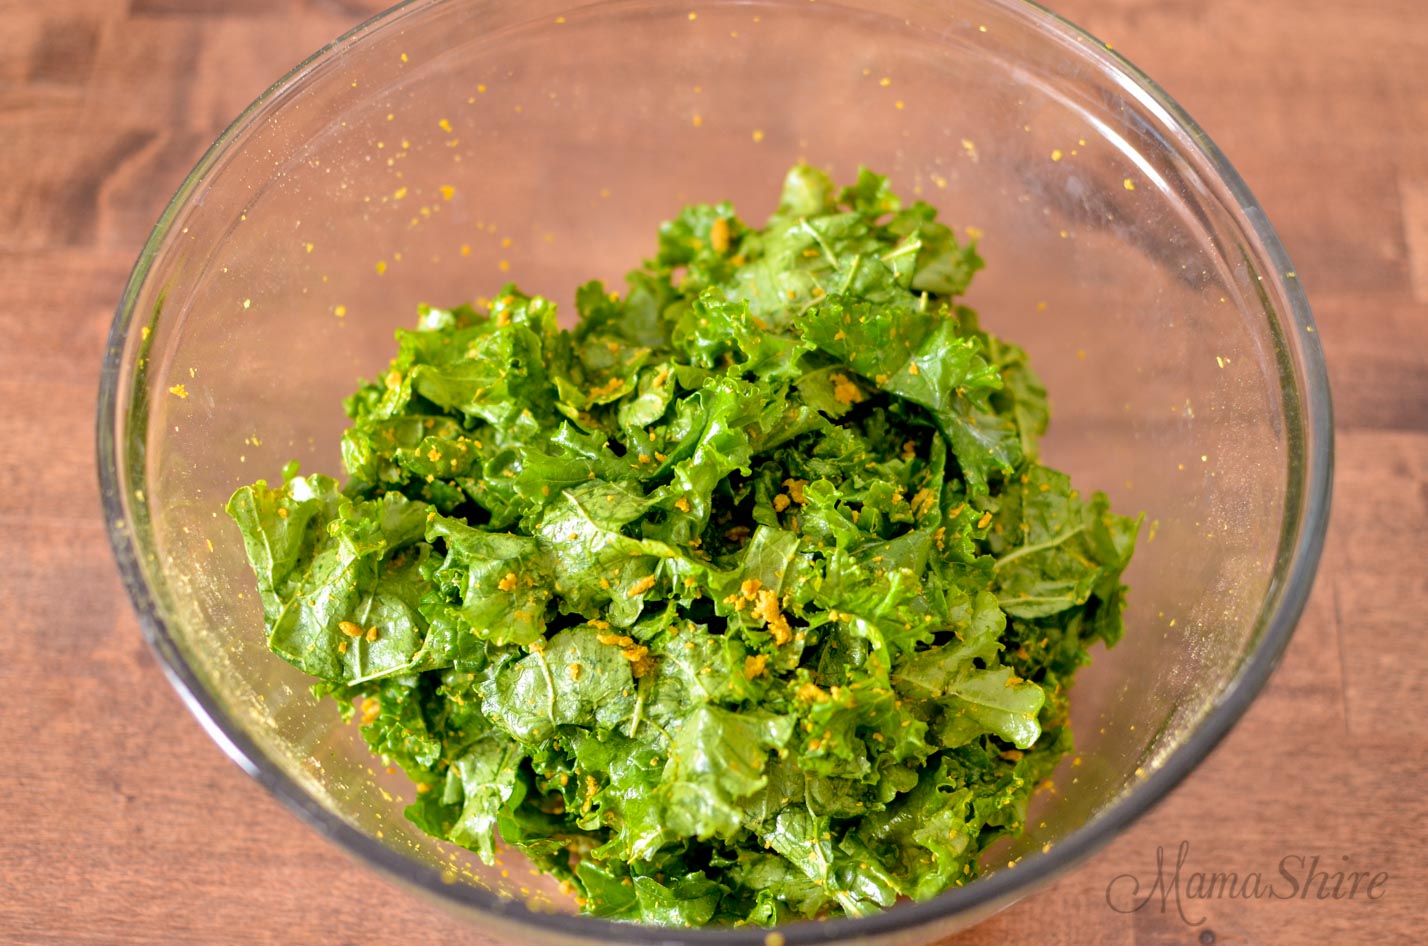 Kale chips before they are air-fried.